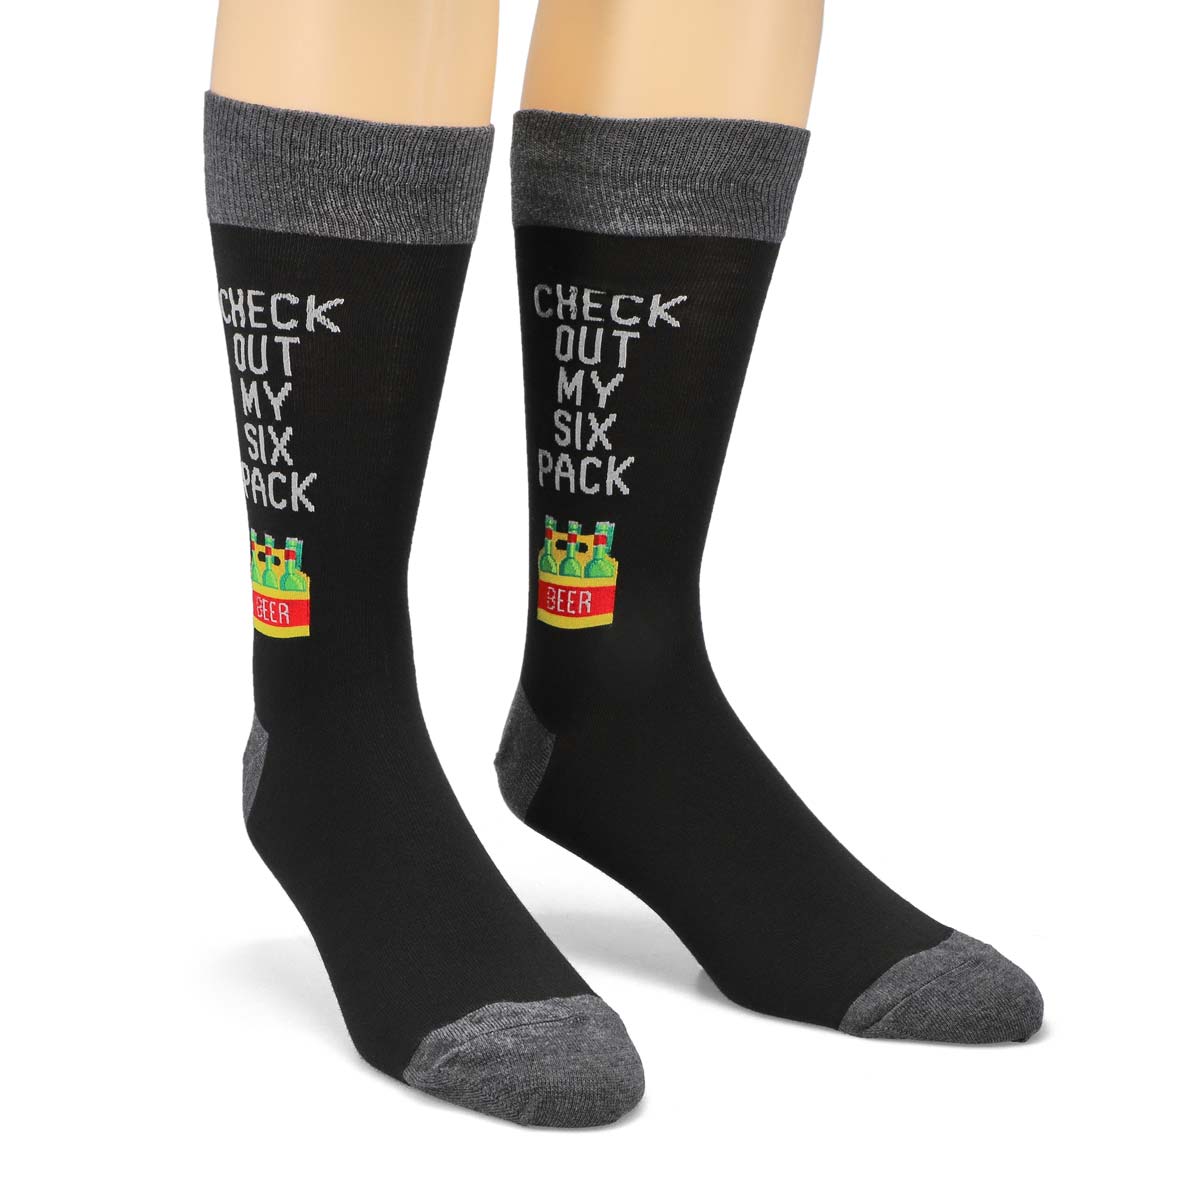 Men's Check Out My Six Pack Sock - Black